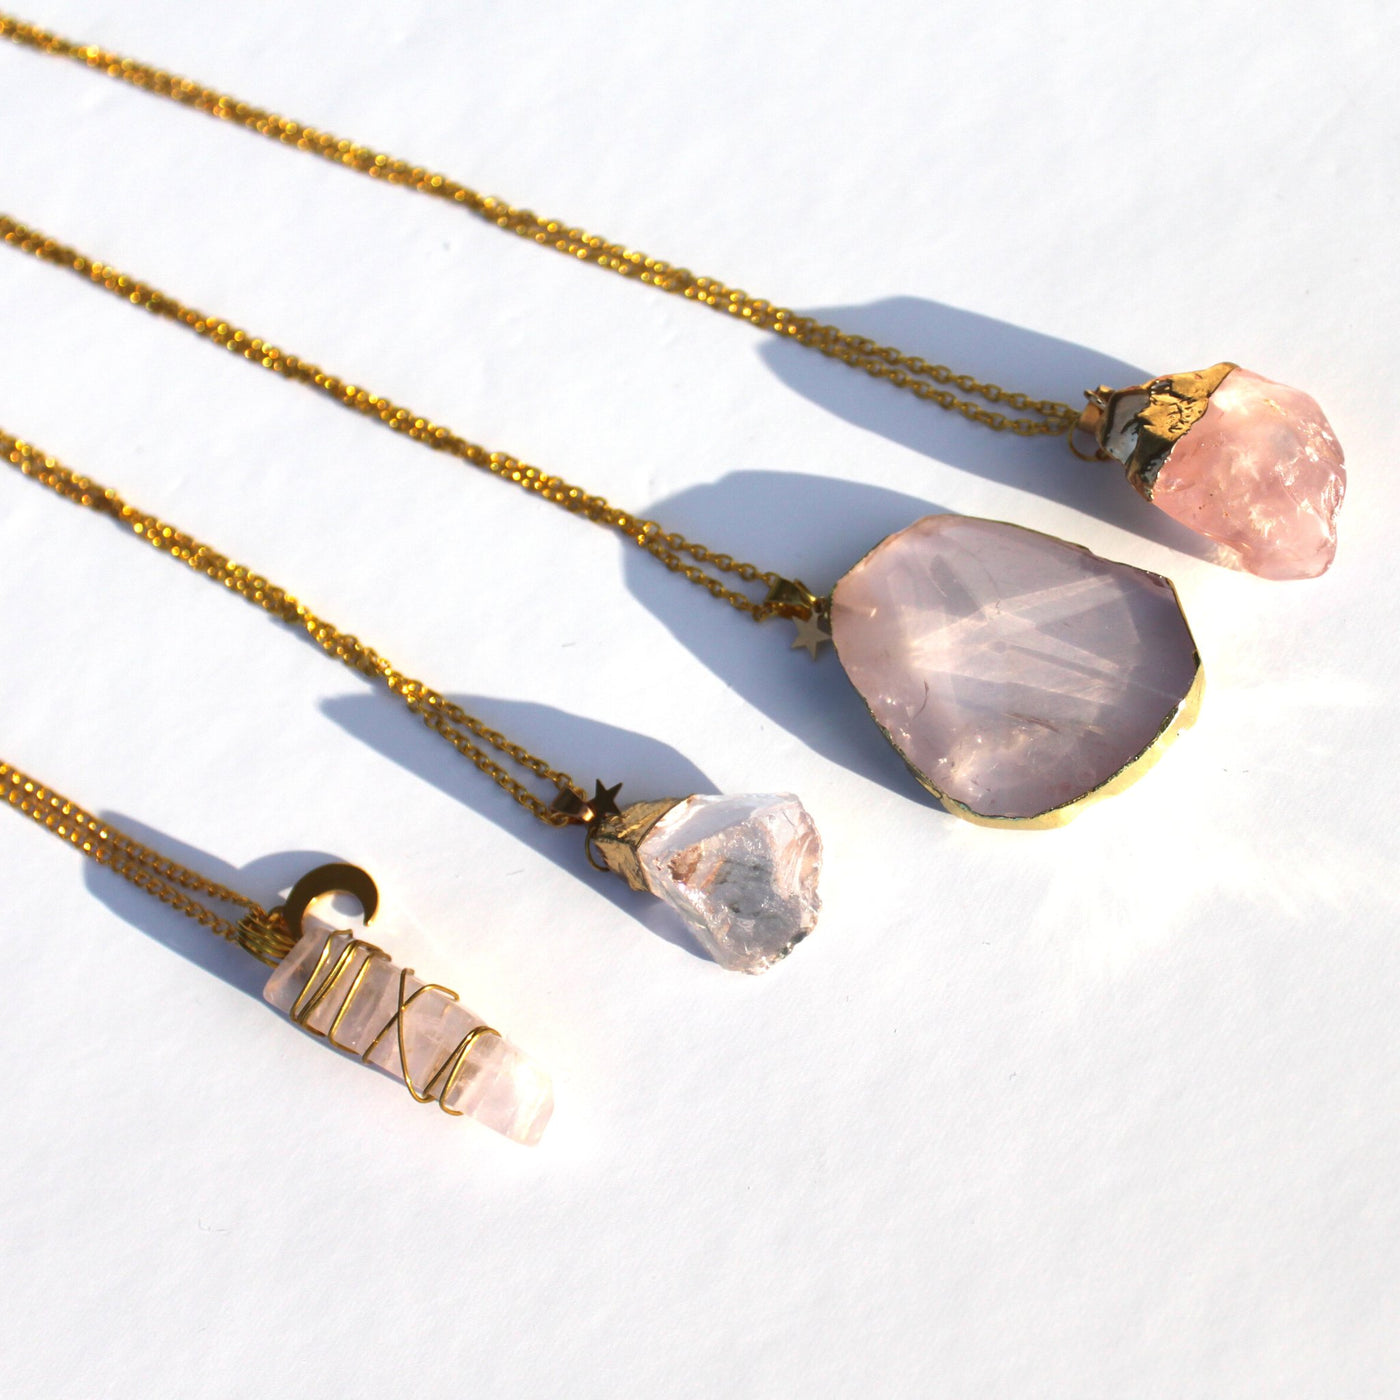 Crystal Power Jewellery | Moon Charged Crystals